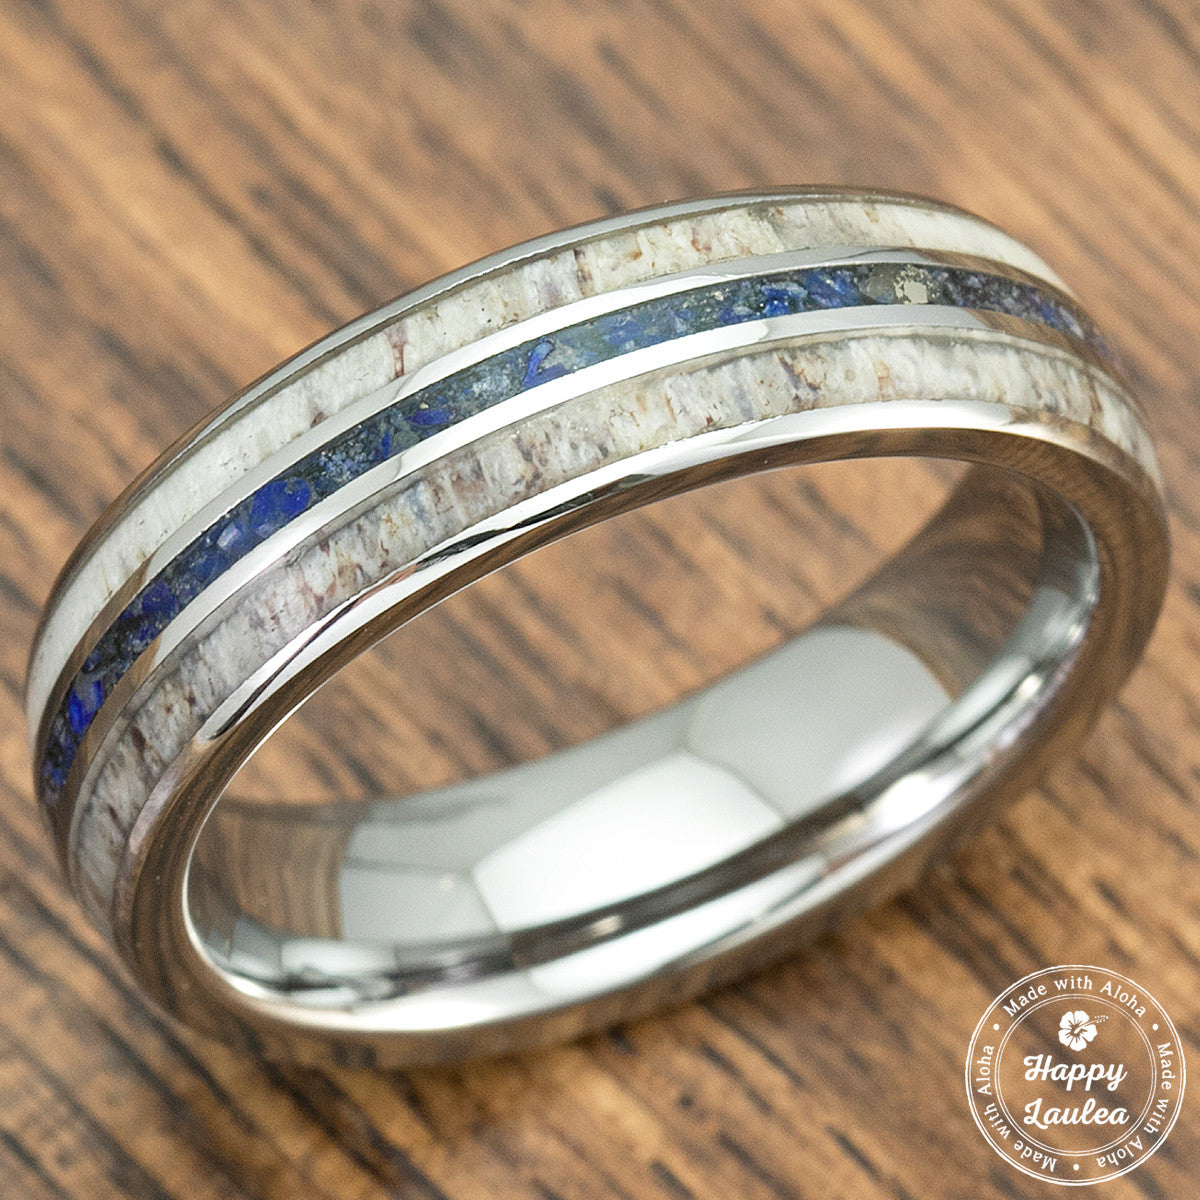 TUNGSTEN CARBIDE RING WITH CRUSHED LAPIS LAZULI & ANTLER TRI-INLAY - 6MM, DOME SHAPE, COMFORT FITMENT